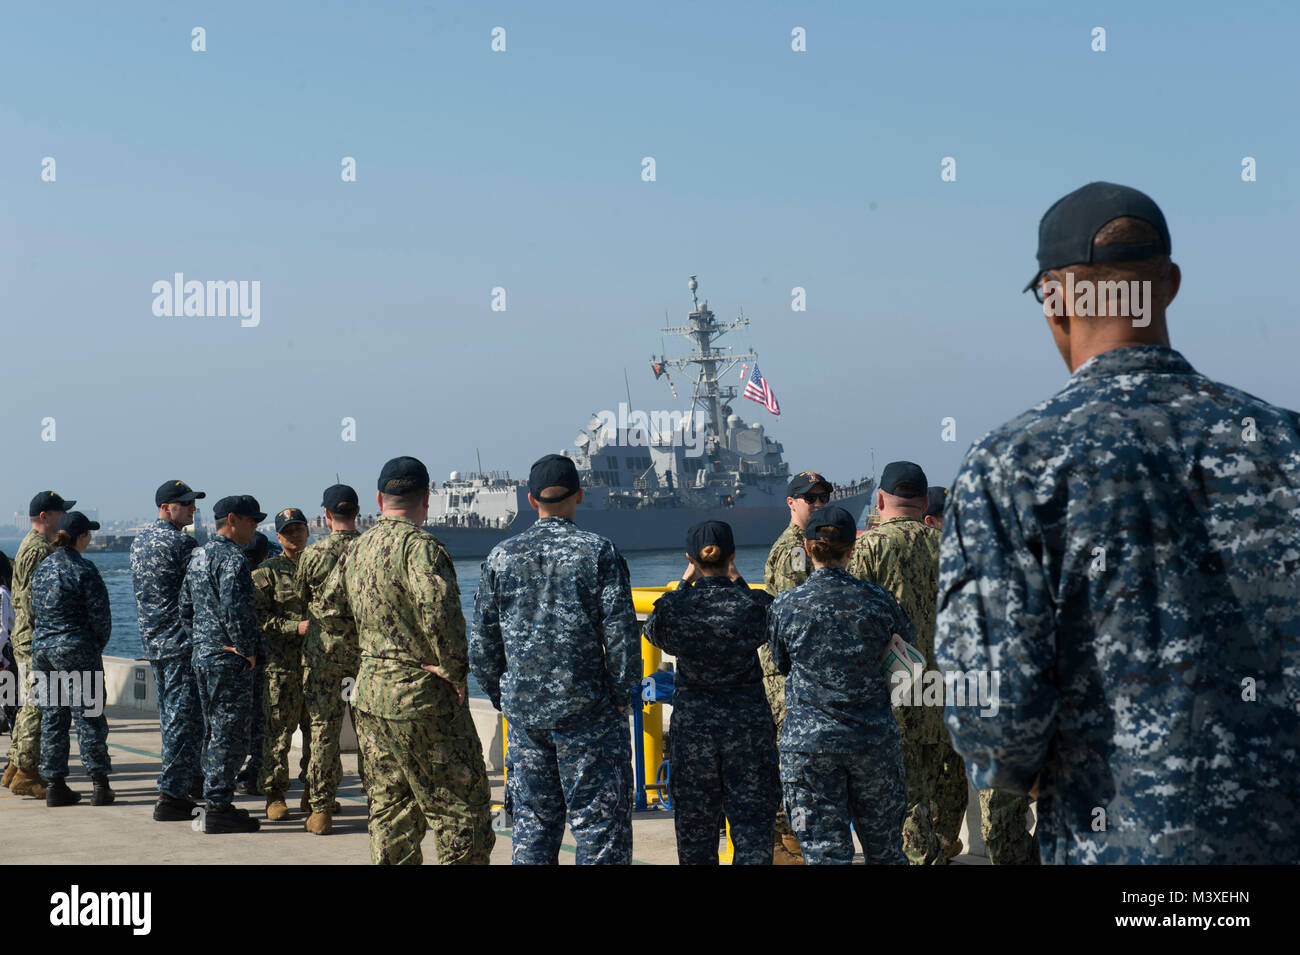 180206-N-HS117-0002  (SAN DIEGO) Arleigh Burke-class guided-missile destroyer USS Sterett (DDG104), along with USS Dewey (DDG 105), departed Naval Base San Diego for a scheduled deployment to conduct operations in the Indo-Pacific Region, Feb. 6. Dewey and Sterett will also support the Wasp Expeditionary Strike Group deployment in order to advance U.S. Pacific Fleet's Up-Gunned ESG concept and will train with forward-deployed amphibious ships across all mission areas. (U.S. Navy video by Mass Communication Specialist Seaman Apprentice Jeffery L. Southerland/RELEASED) Stock Photo